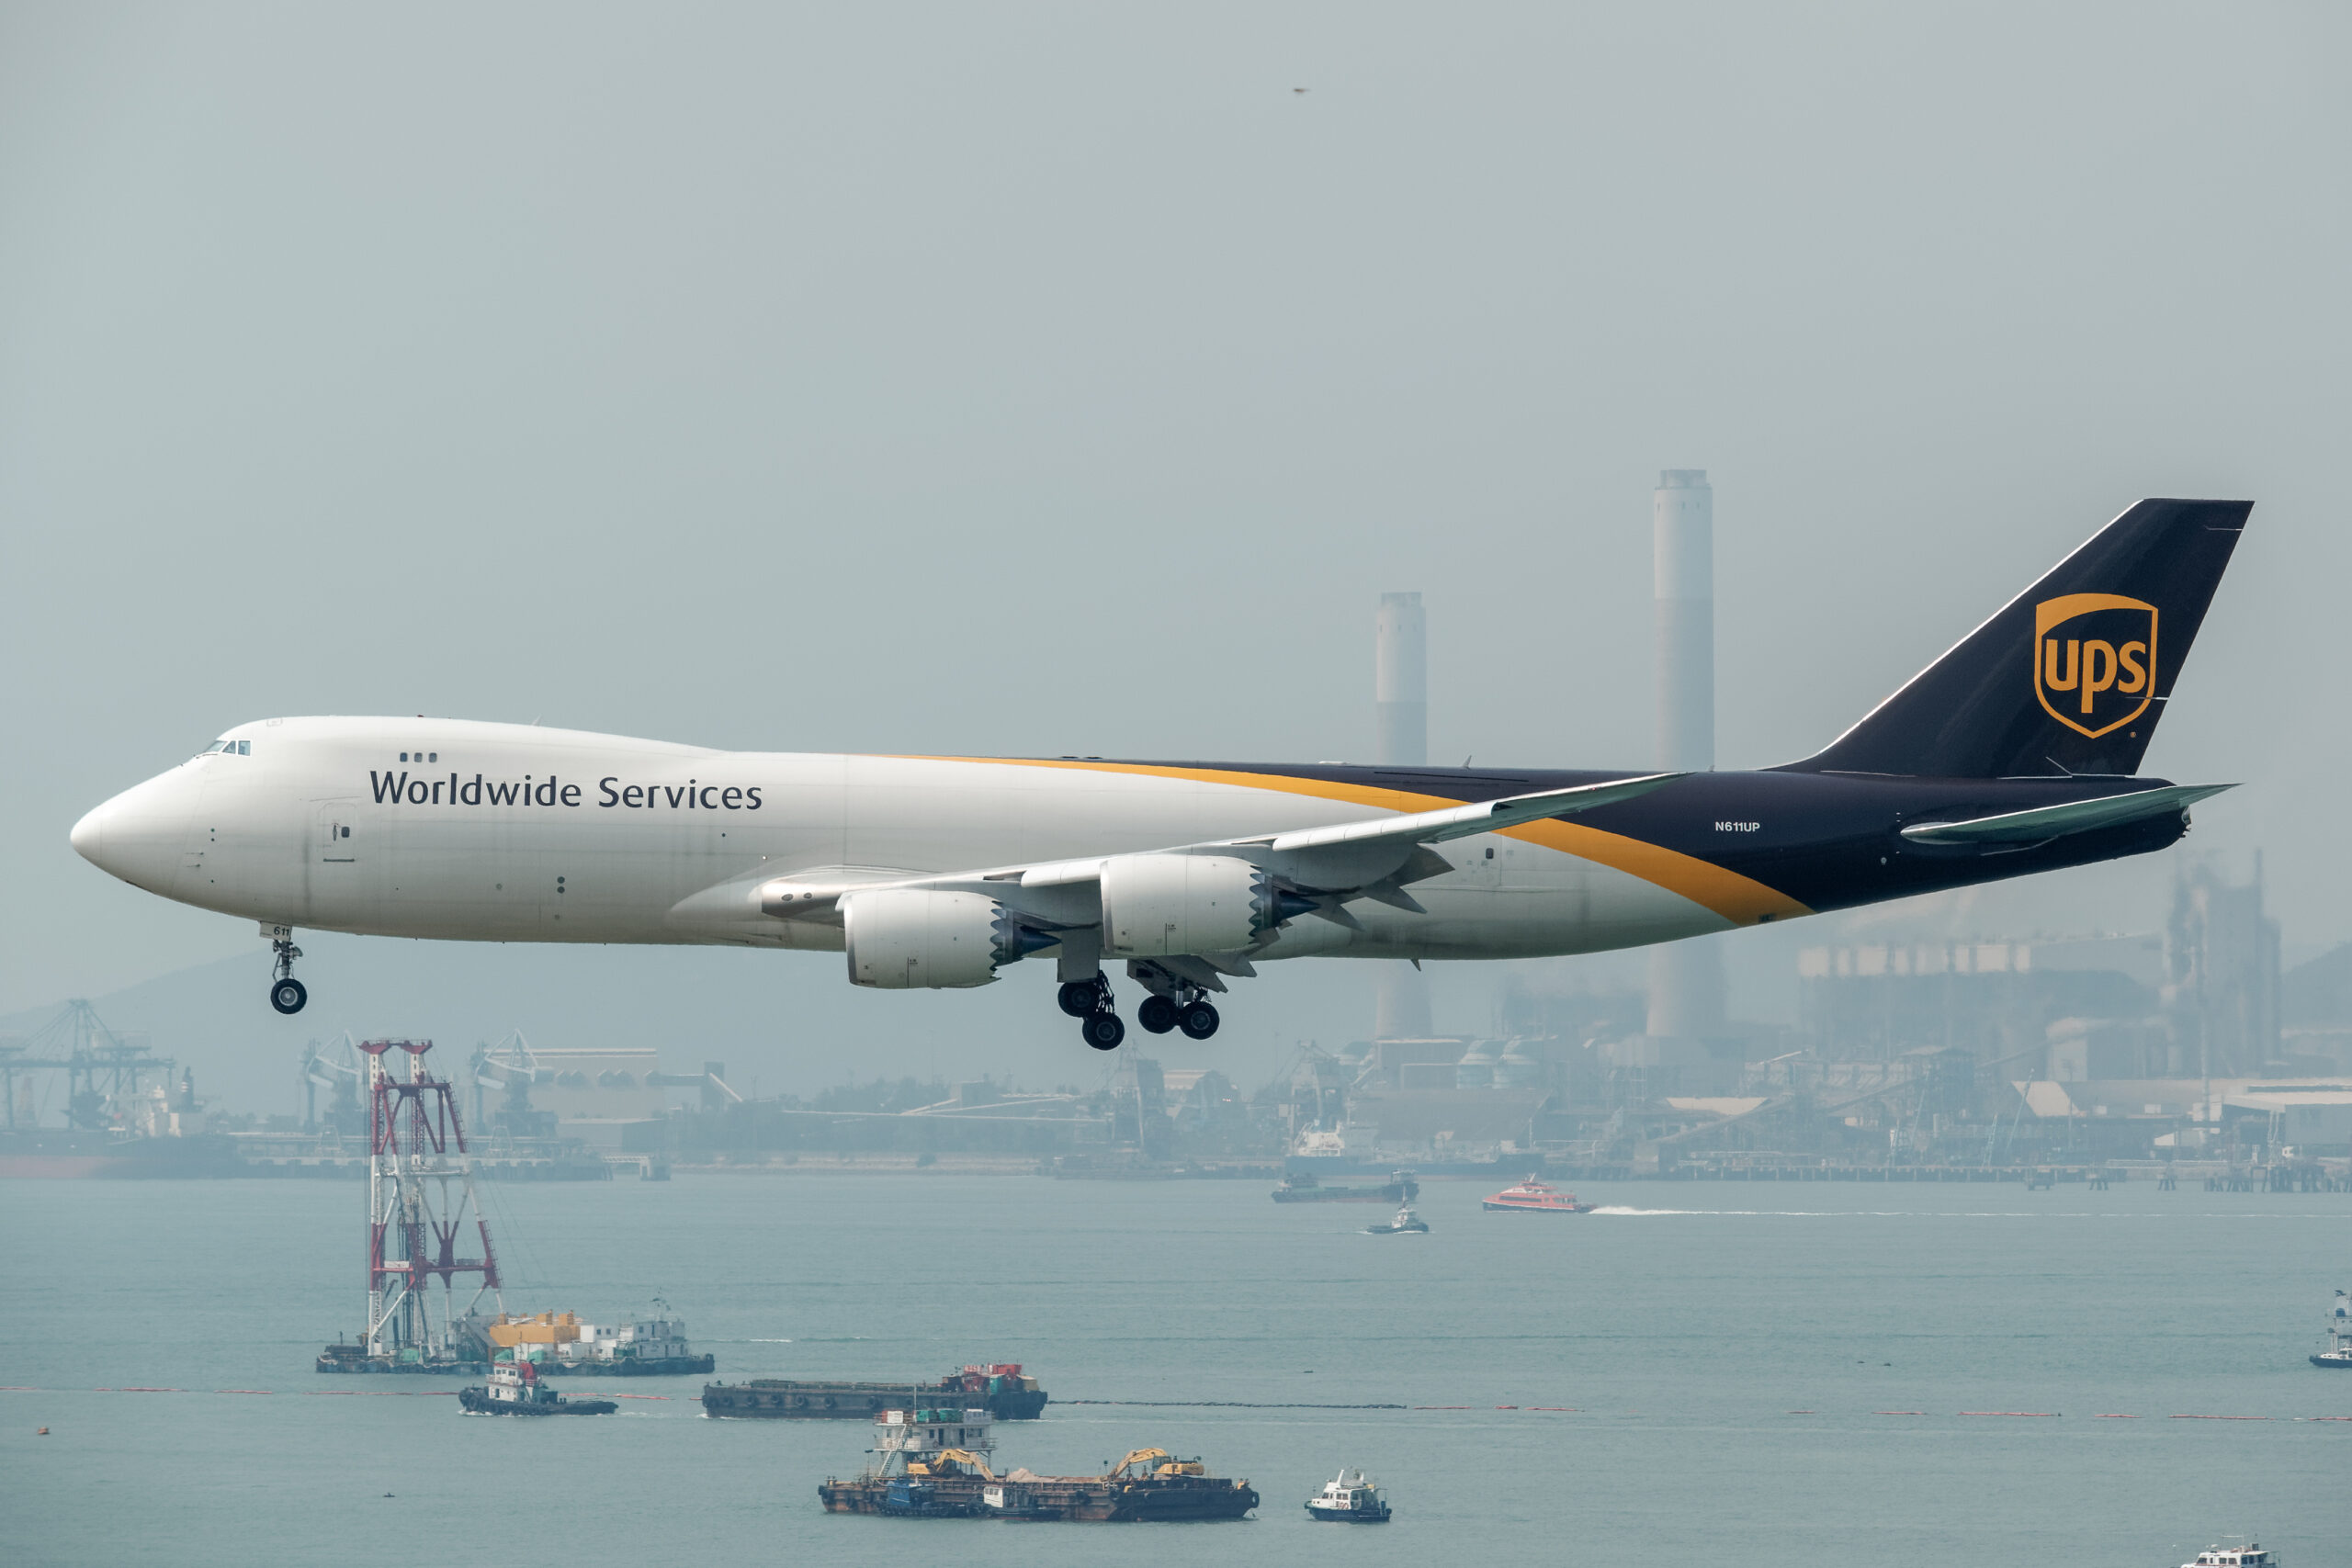 UPS Boeing 747-8F By Melv_L - MACASR - https://www.flickr.com/photos/54943237@N04/40669964253/, CC BY-SA 2.0, https://commons.wikimedia.org/w/index.php?curid=81422394